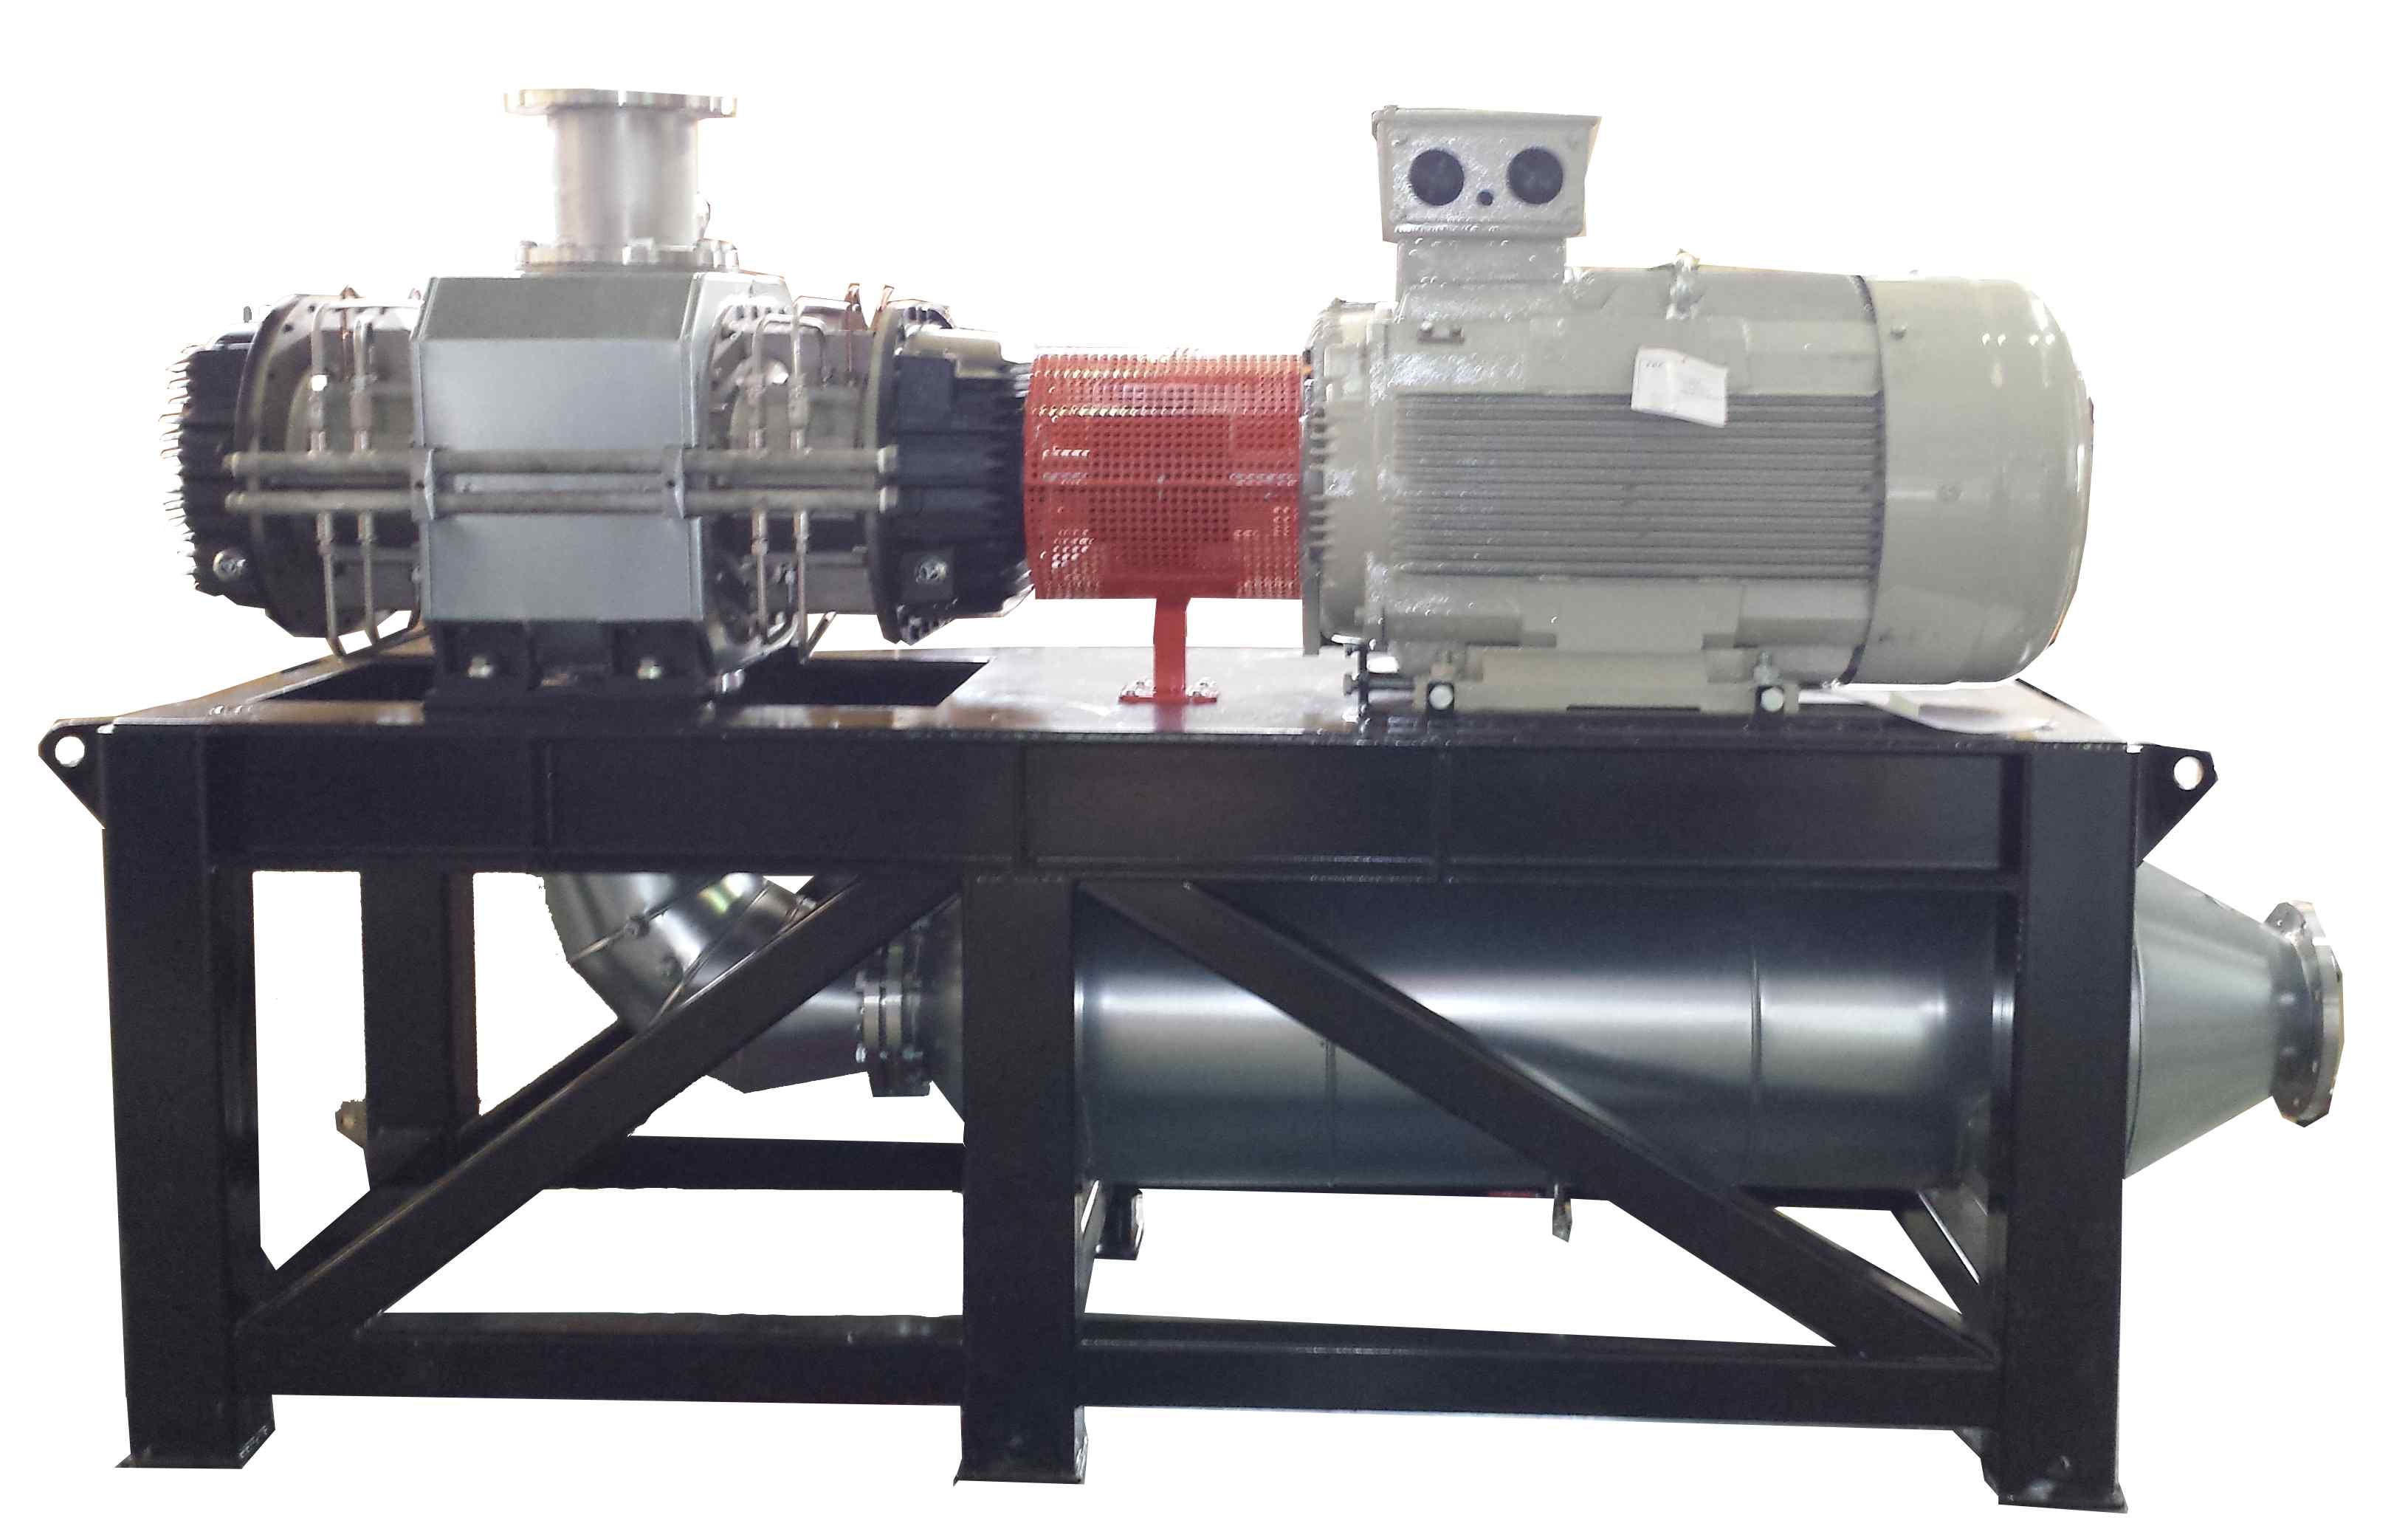 Cropped photo of a Hibon process blower unit equipped with a water-injection positive displacement blower, motor, direct drive and silencer for the mechanical compression of vapors.